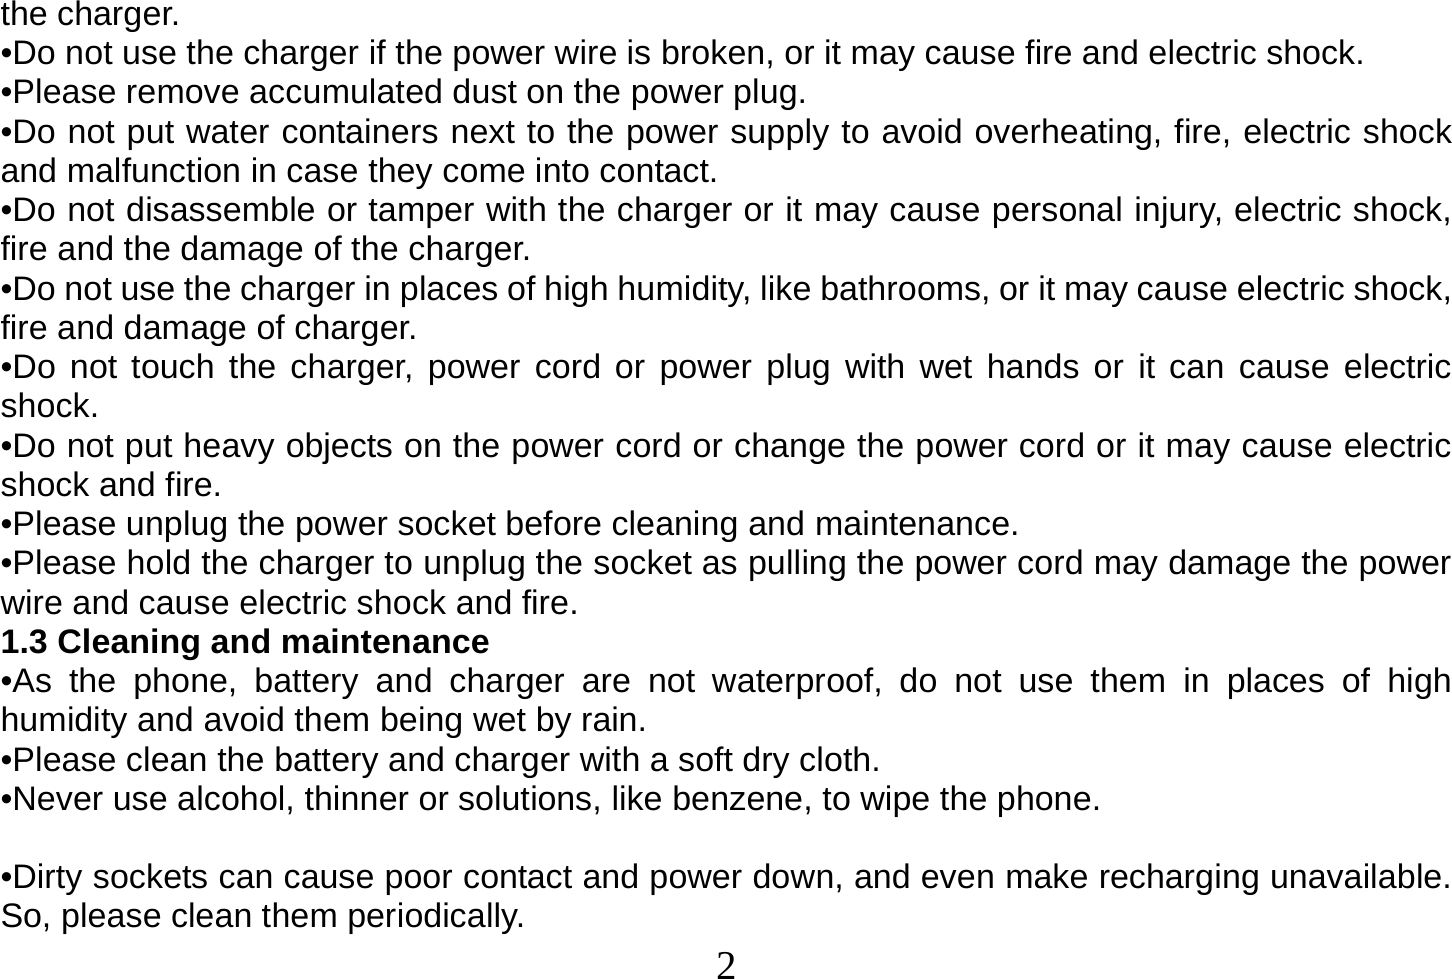  2  the charger. •Do not use the charger if the power wire is broken, or it may cause fire and electric shock. •Please remove accumulated dust on the power plug. •Do not put water containers next to the power supply to avoid overheating, fire, electric shock and malfunction in case they come into contact. •Do not disassemble or tamper with the charger or it may cause personal injury, electric shock, fire and the damage of the charger. •Do not use the charger in places of high humidity, like bathrooms, or it may cause electric shock, fire and damage of charger. •Do not touch the charger, power cord or power plug with wet hands or it can cause electric shock. •Do not put heavy objects on the power cord or change the power cord or it may cause electric shock and fire. •Please unplug the power socket before cleaning and maintenance. •Please hold the charger to unplug the socket as pulling the power cord may damage the power wire and cause electric shock and fire. 1.3 Cleaning and maintenance •As the phone, battery and charger are not waterproof, do not use them in places of high humidity and avoid them being wet by rain. •Please clean the battery and charger with a soft dry cloth. •Never use alcohol, thinner or solutions, like benzene, to wipe the phone.   •Dirty sockets can cause poor contact and power down, and even make recharging unavailable. So, please clean them periodically. 